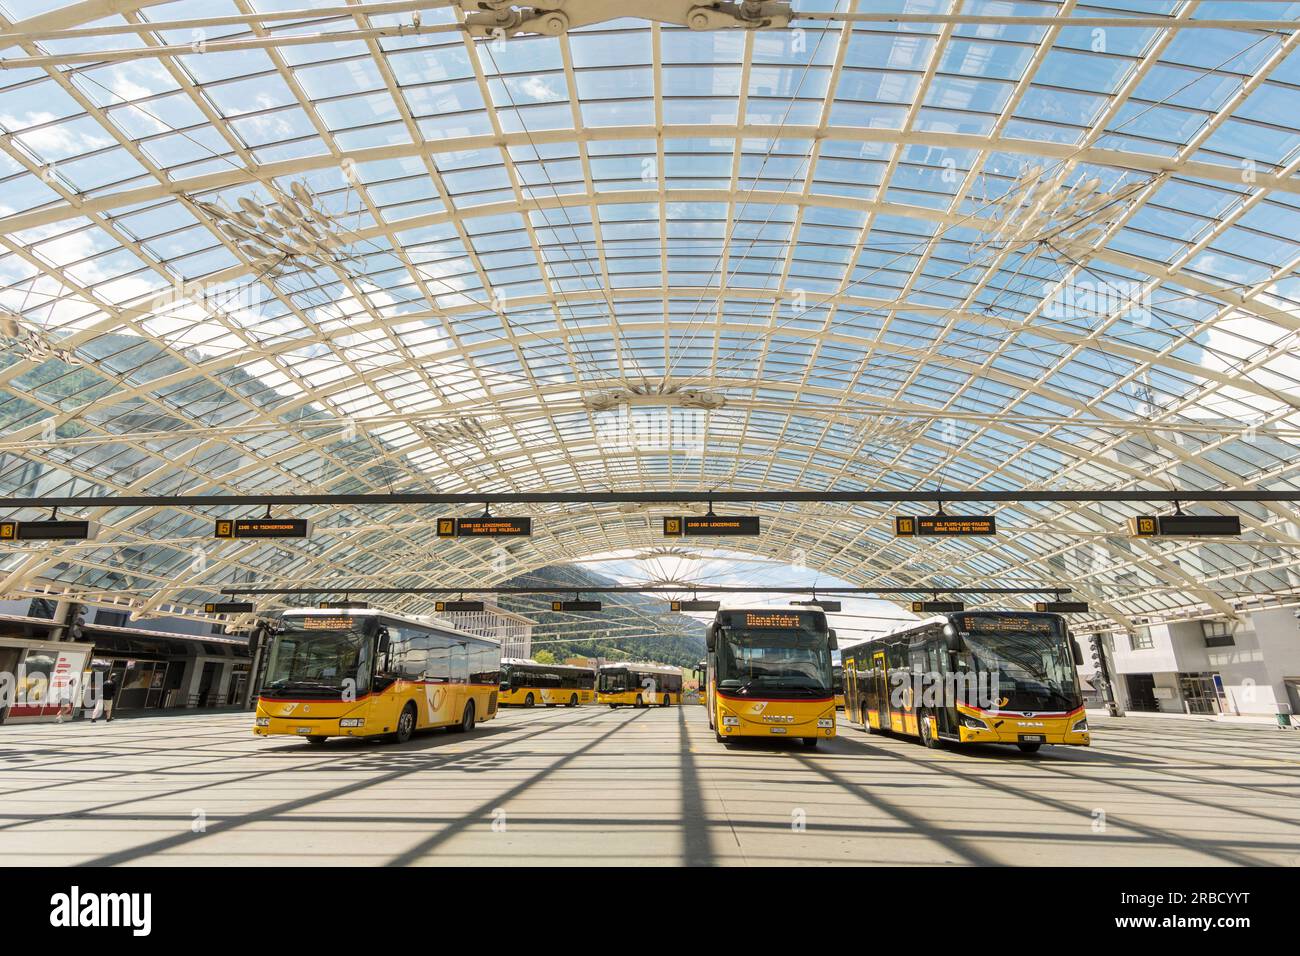 Inside the glass roofed bus station in Chur, Switzerland, Europe Stock Photo